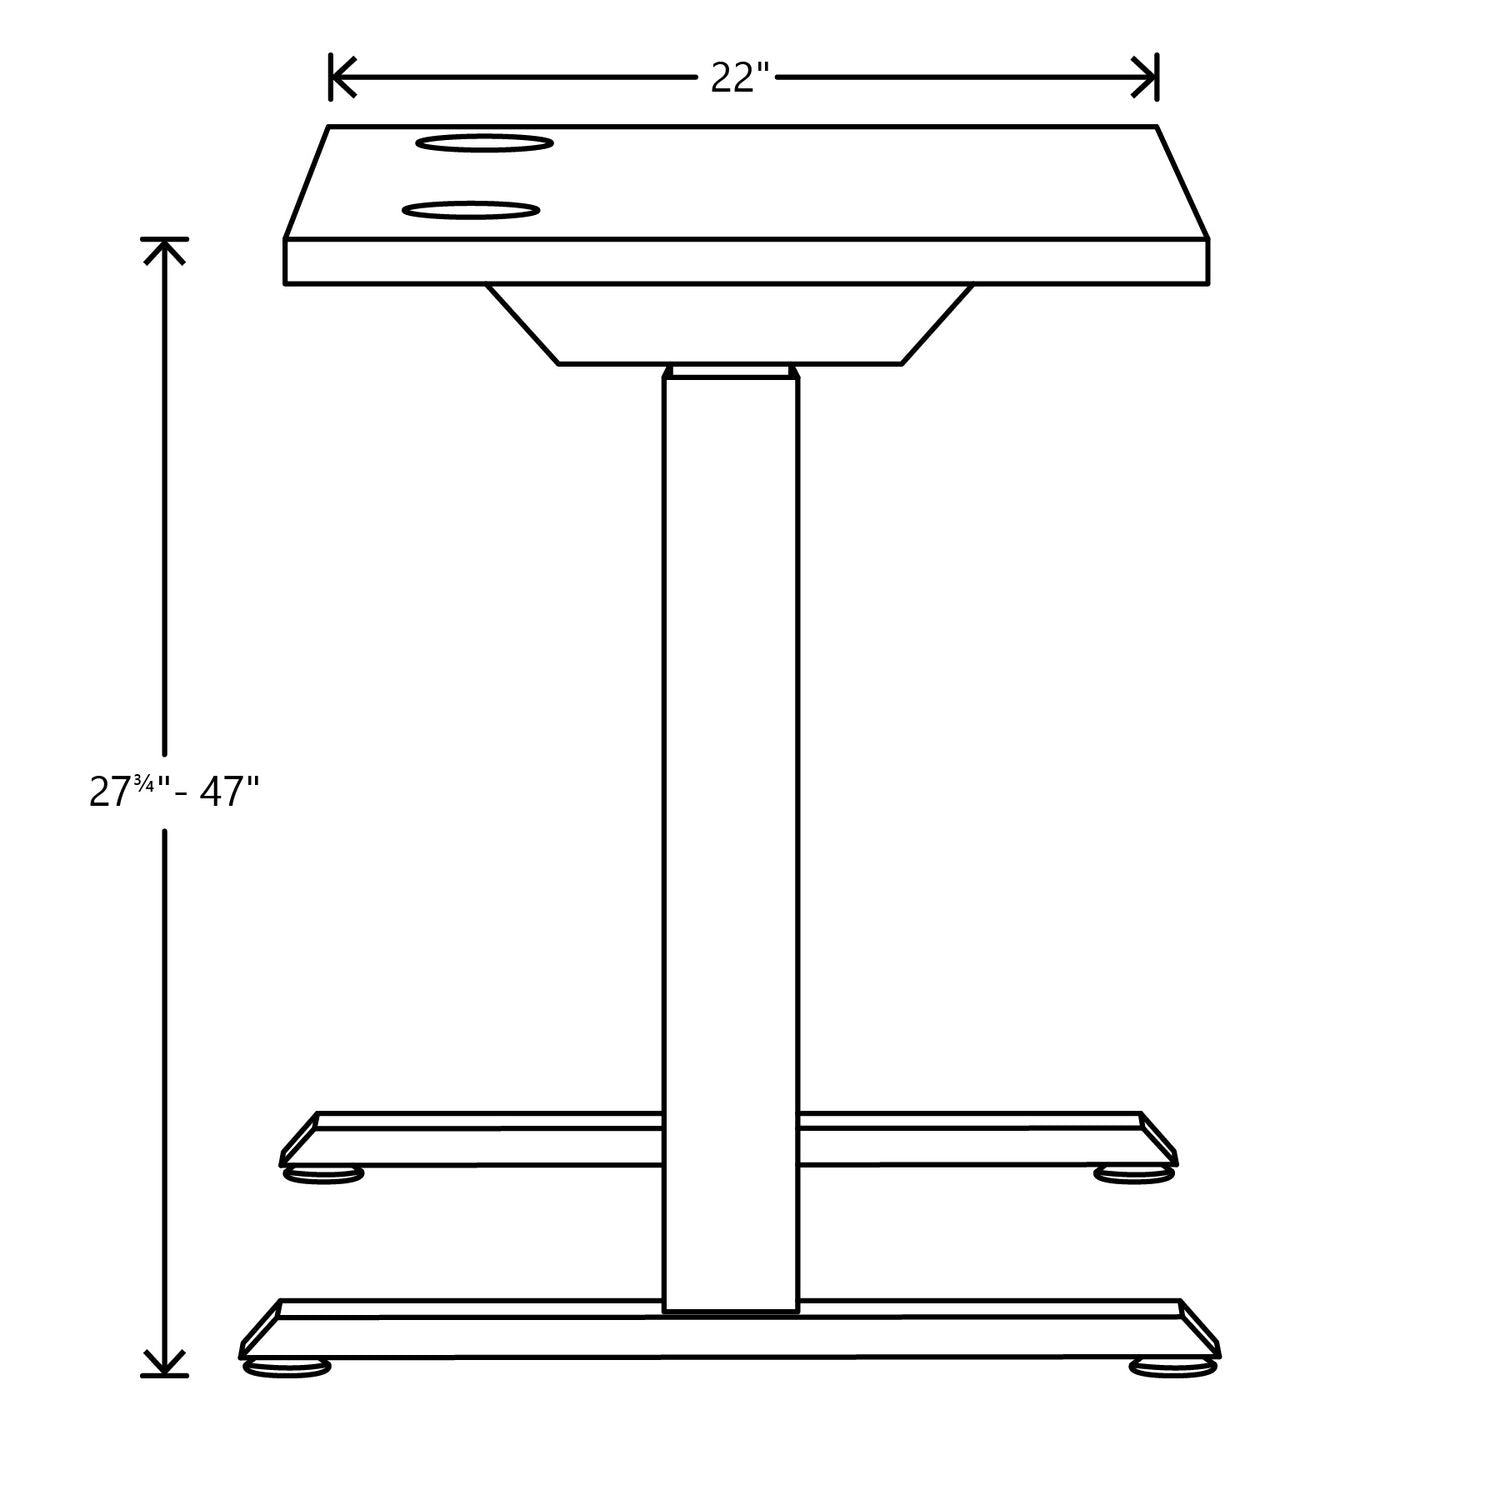 coordinate-height-adjustable-desk-bundle-2-stage-46-x-22-x-2775-to-47-pinnacle\\black-ships-in-7-10-business-days_honhat2spnb2246 - 6